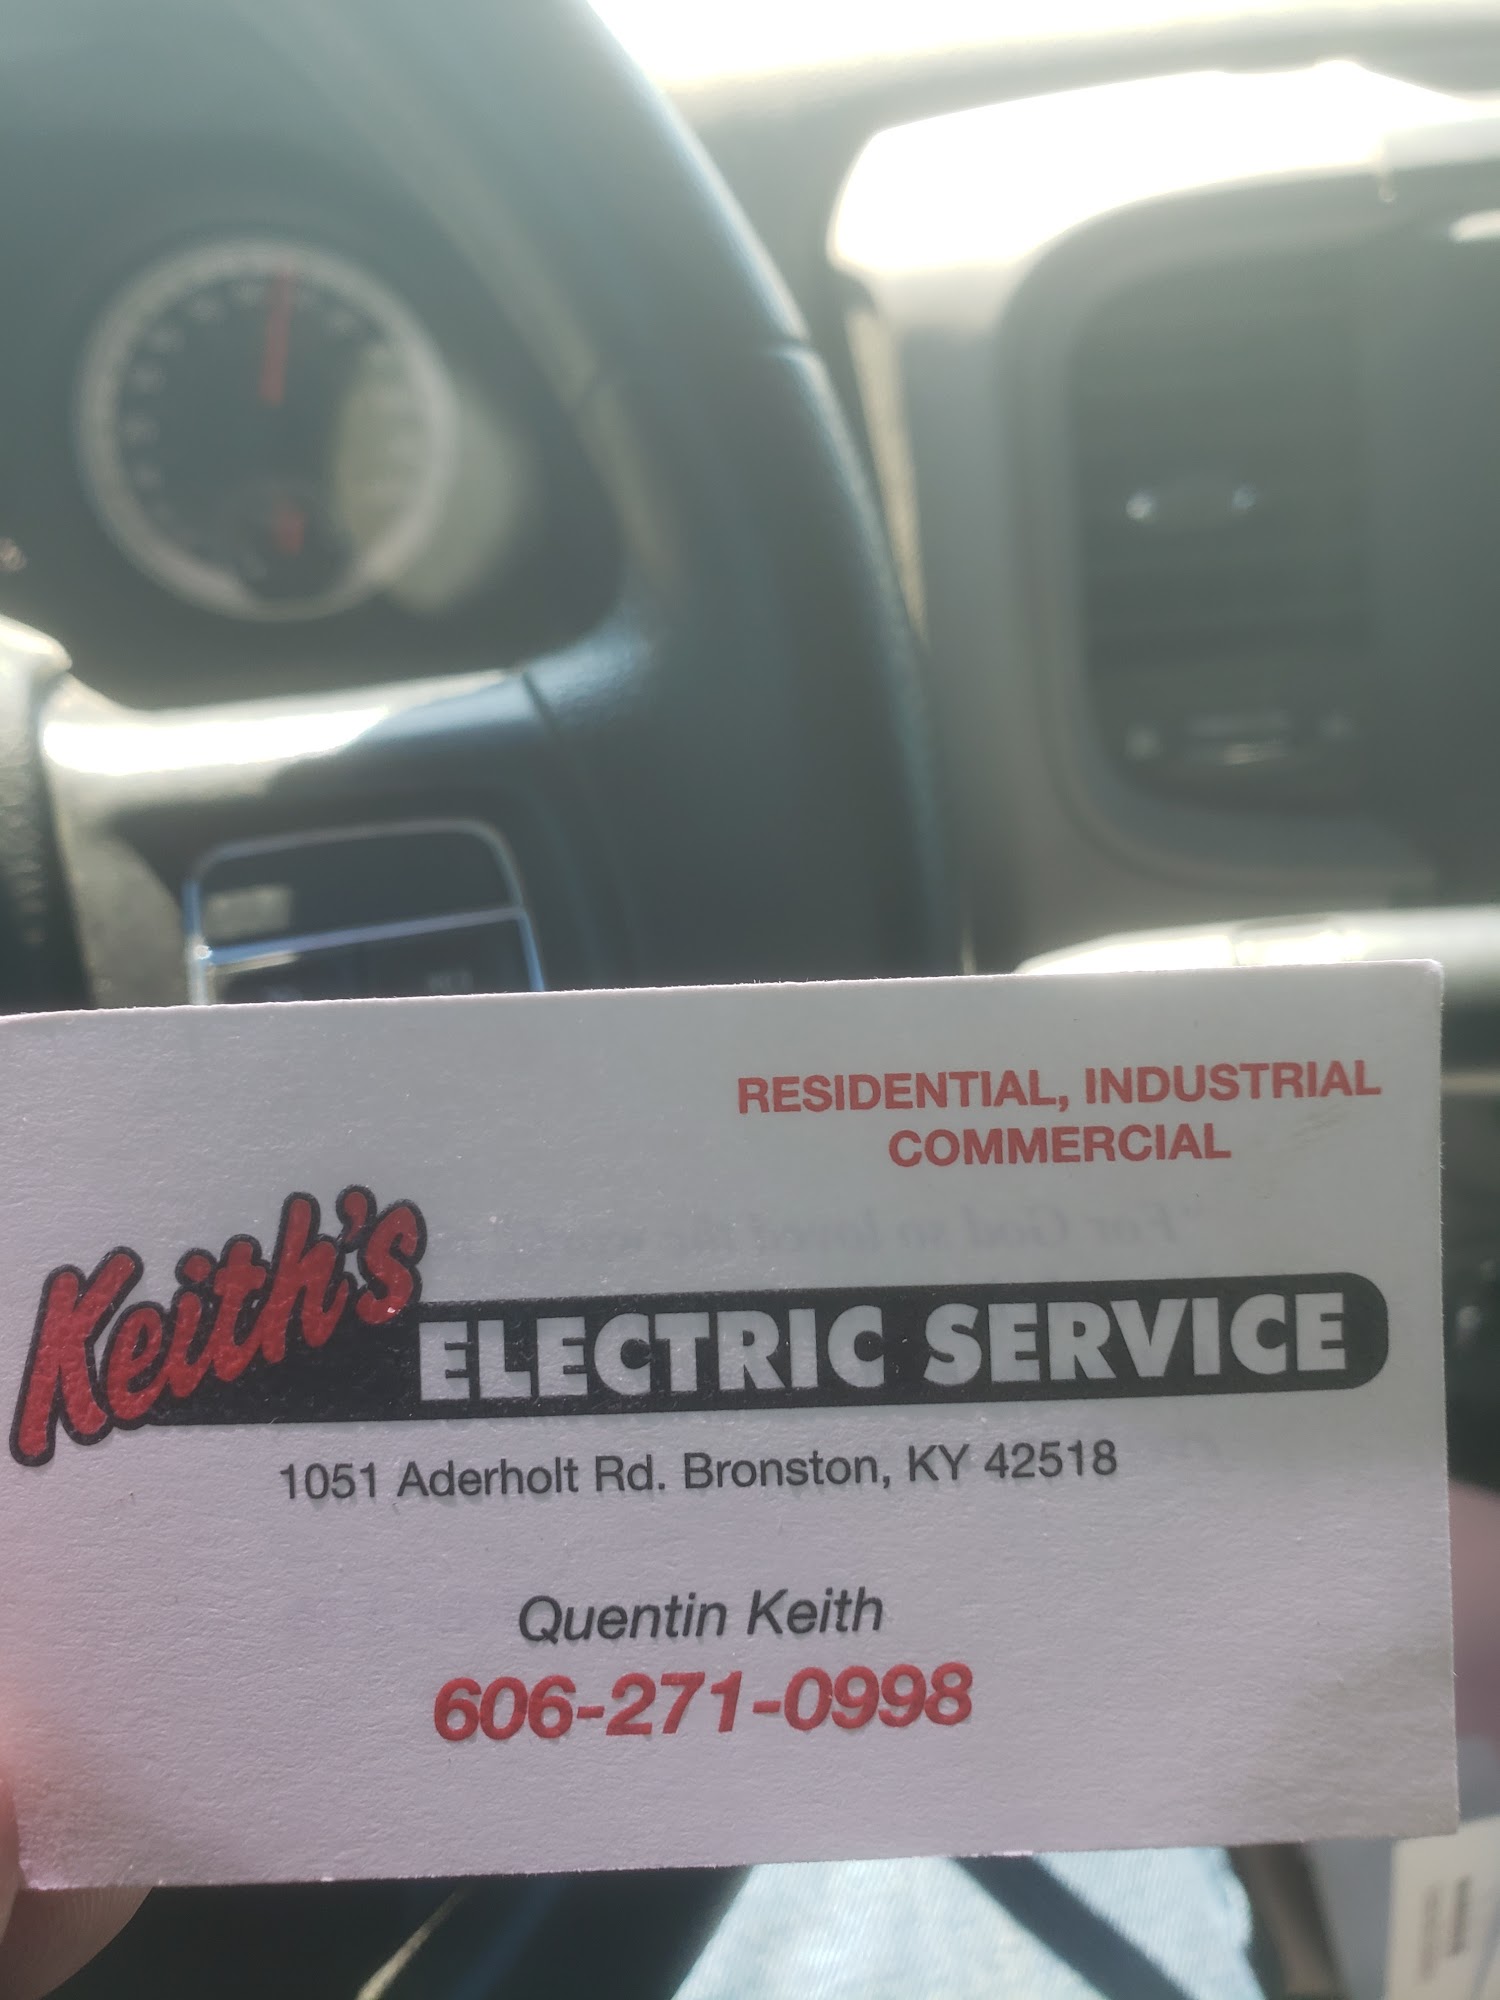 Keith's Electric Services 1051 Aderholt Rd, Bronston Kentucky 42518